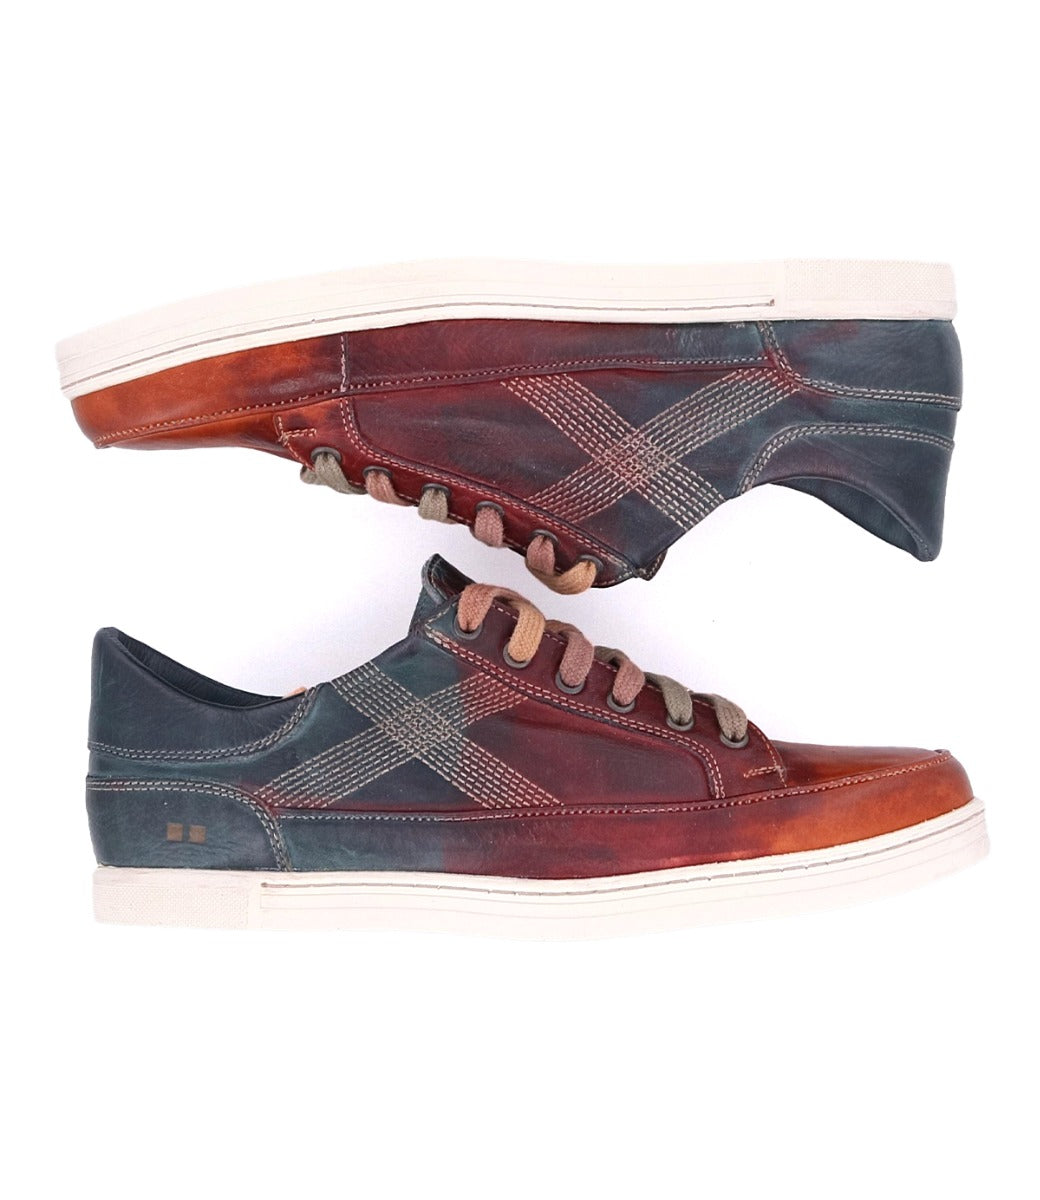 A pair of Bed Stu Wizard men's sneakers in red, blue and brown.